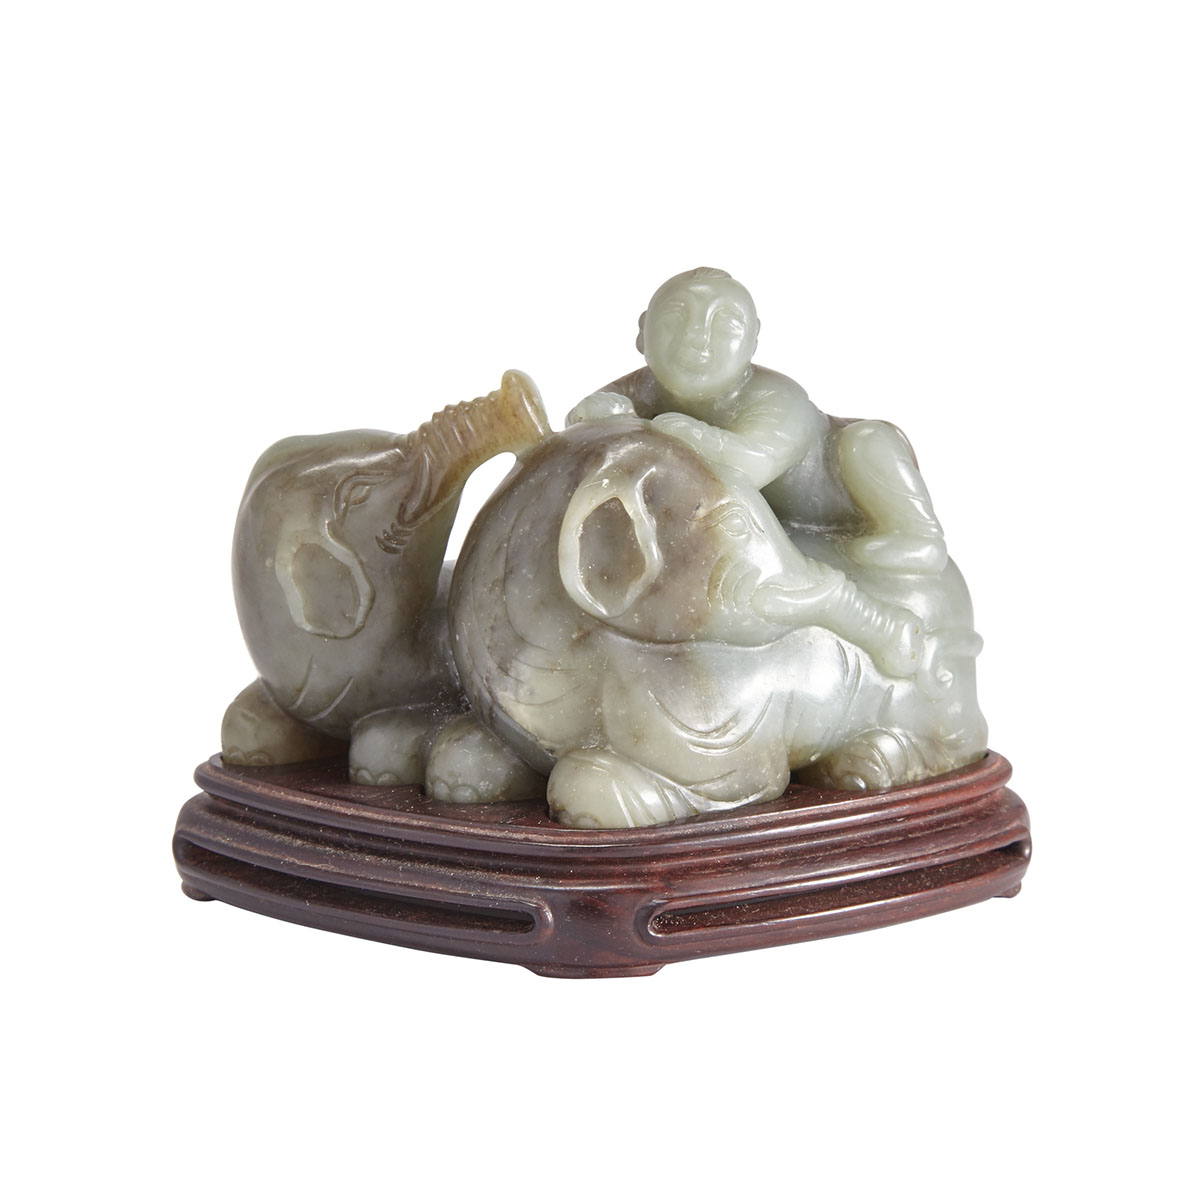 A Jade Carving of Boy and Elephants with a Zitan Stand, Qing Dynasty